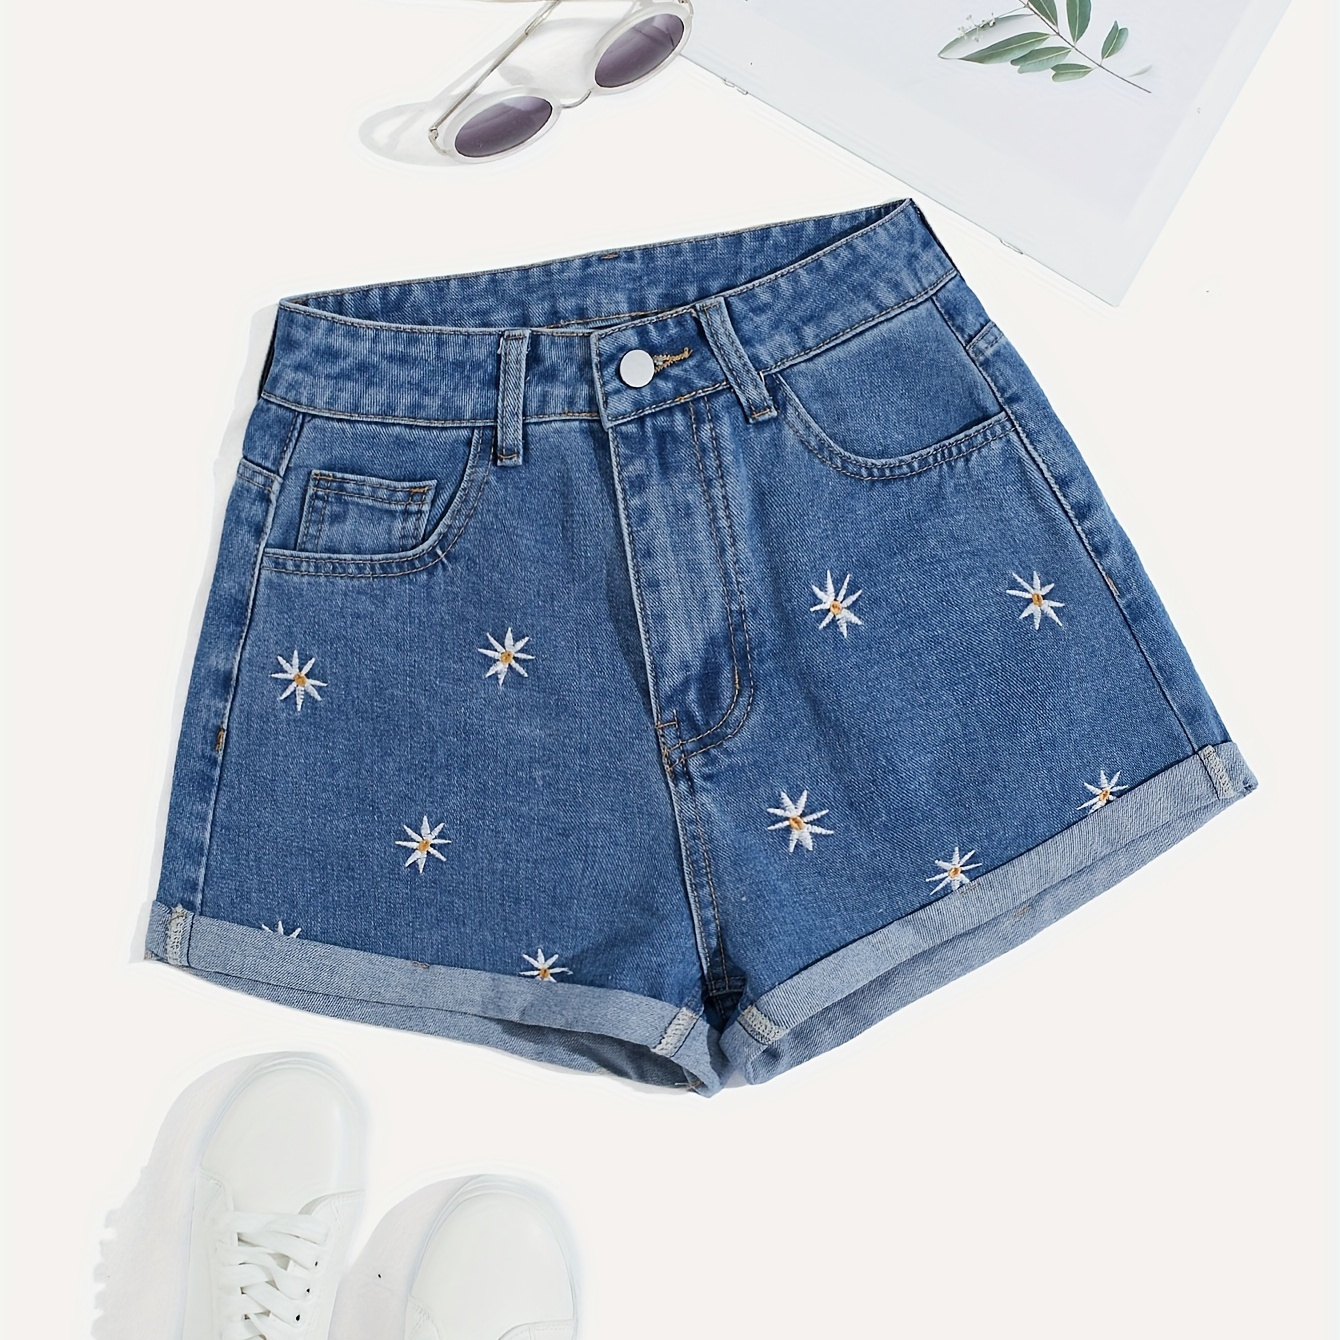 

Women's Casual Denim Shorts, Embroidered Floral Pattern, Mid-rise, Summer Fashion, Jean Shorts With Pockets